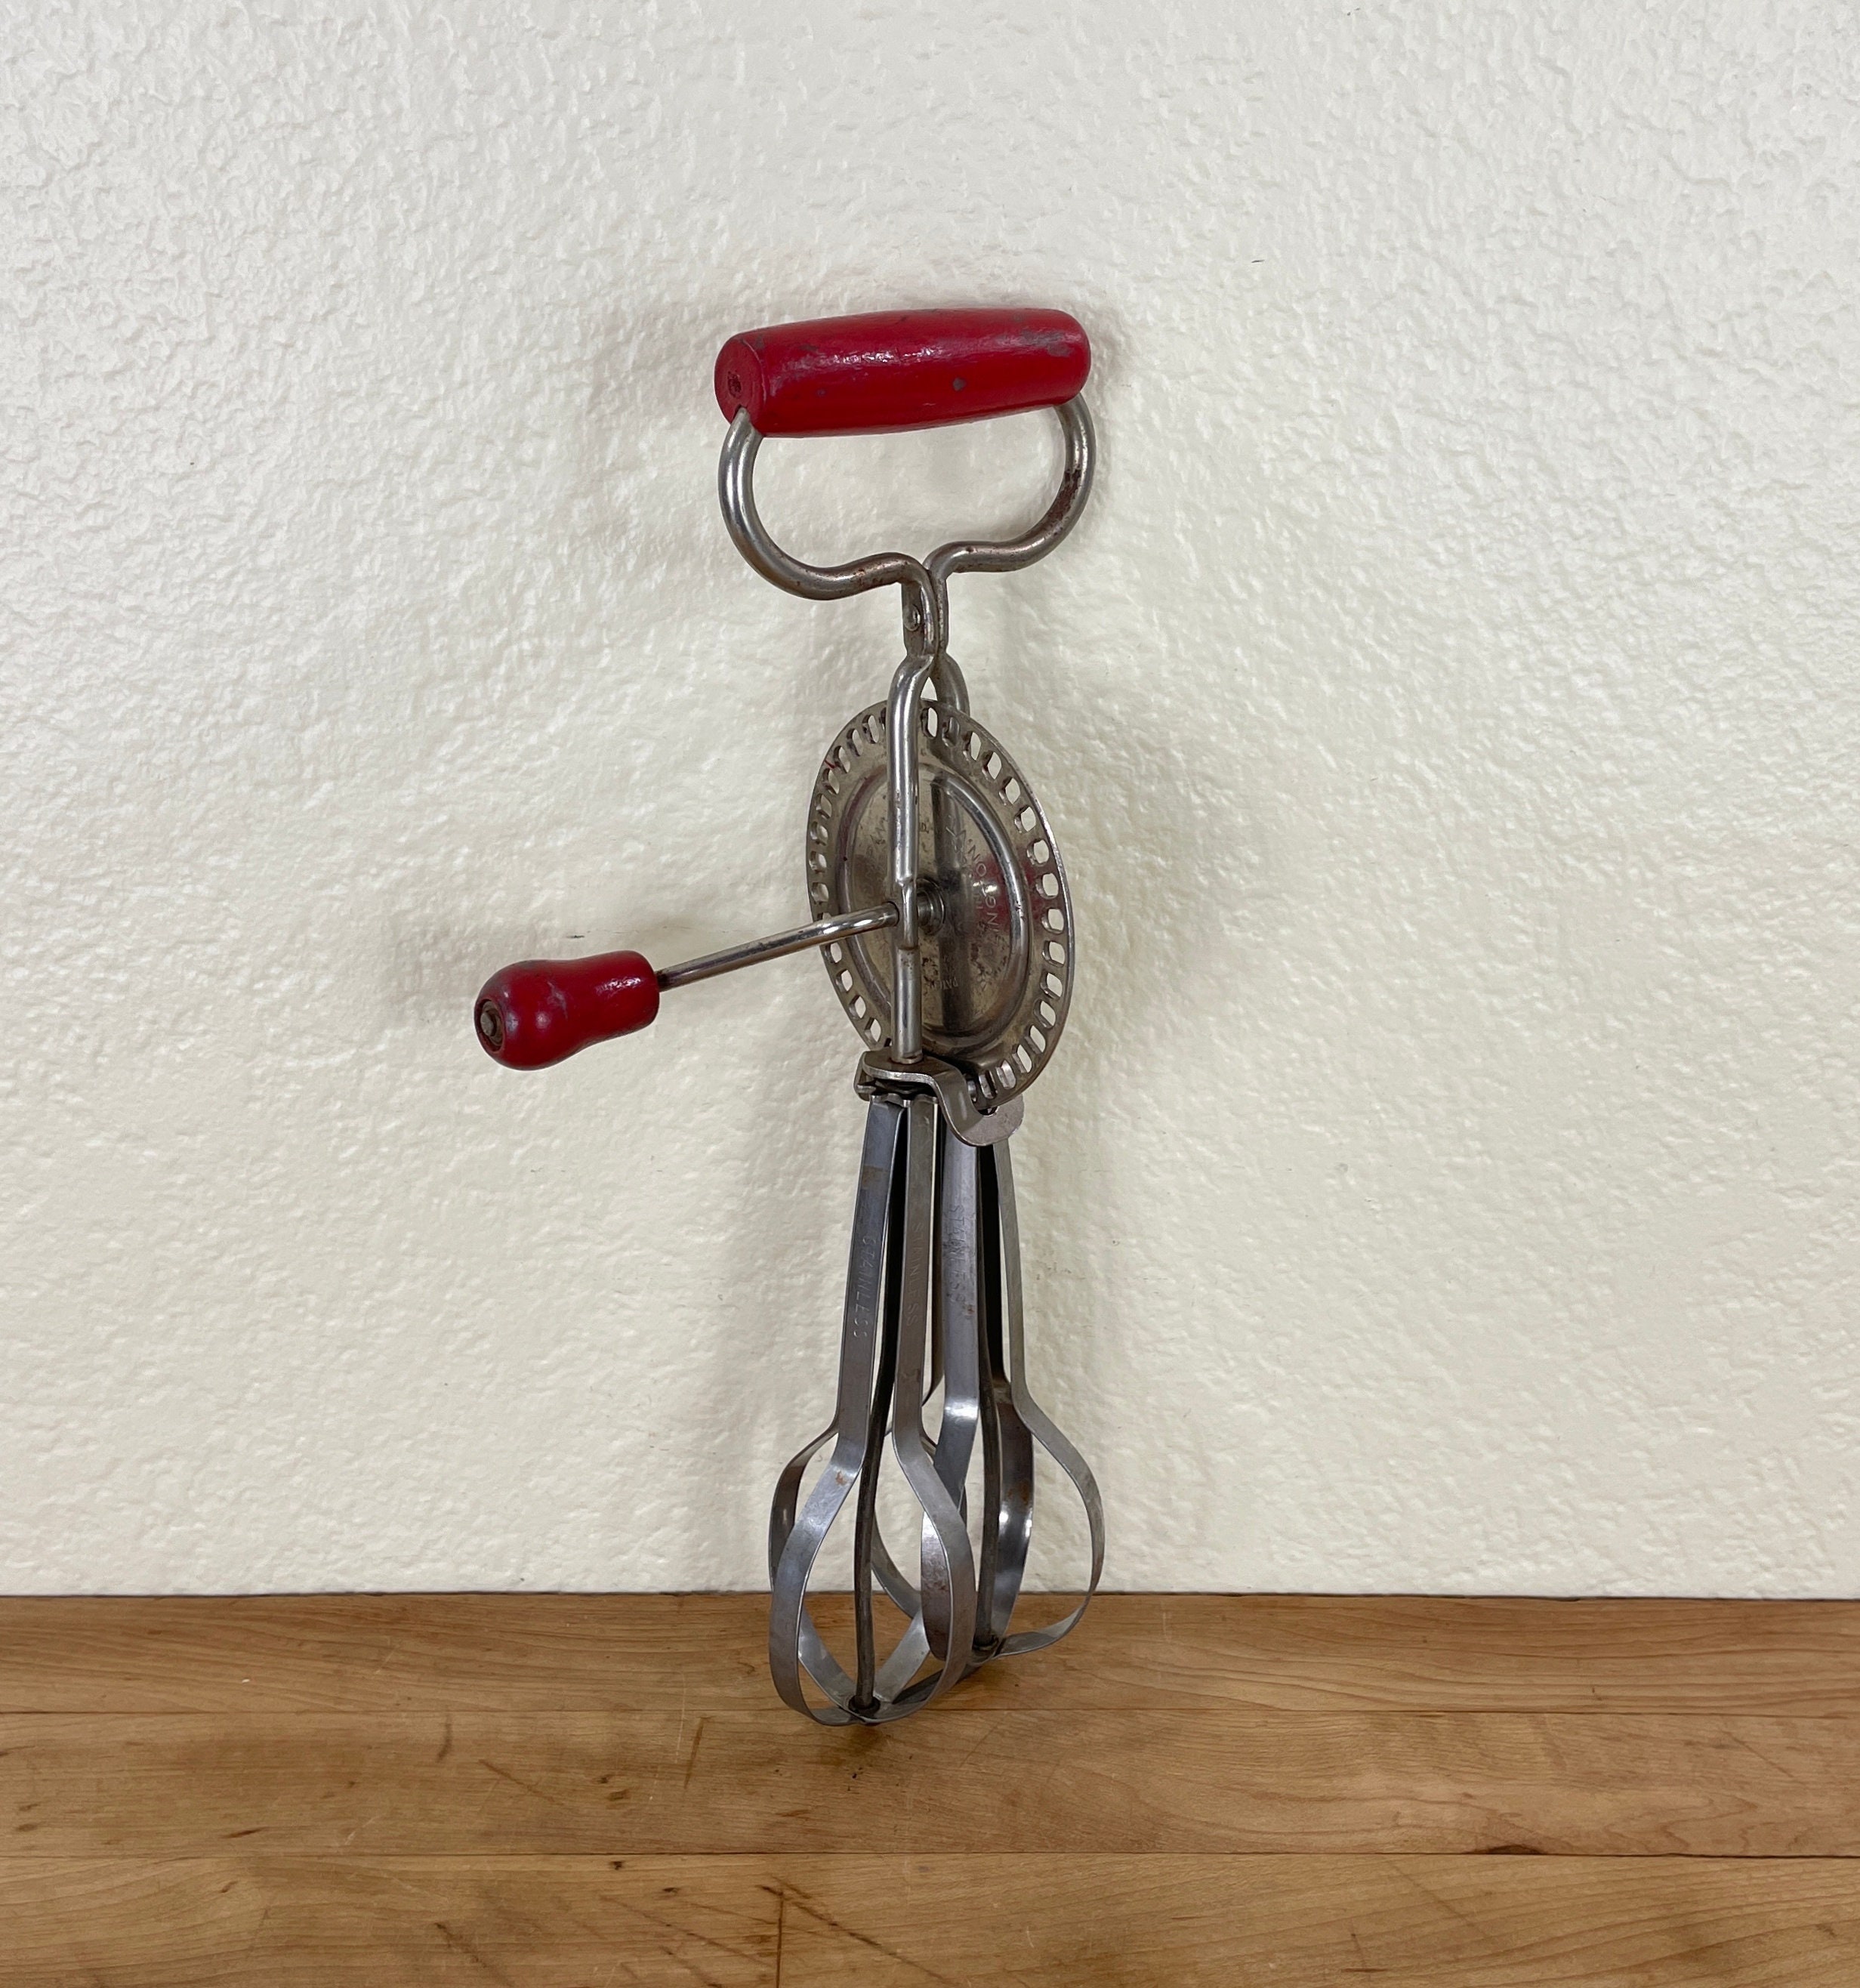 Vintage Egg Beater Manual Crank Hand Mixer Blender Stainless Steel Red  Handle a9